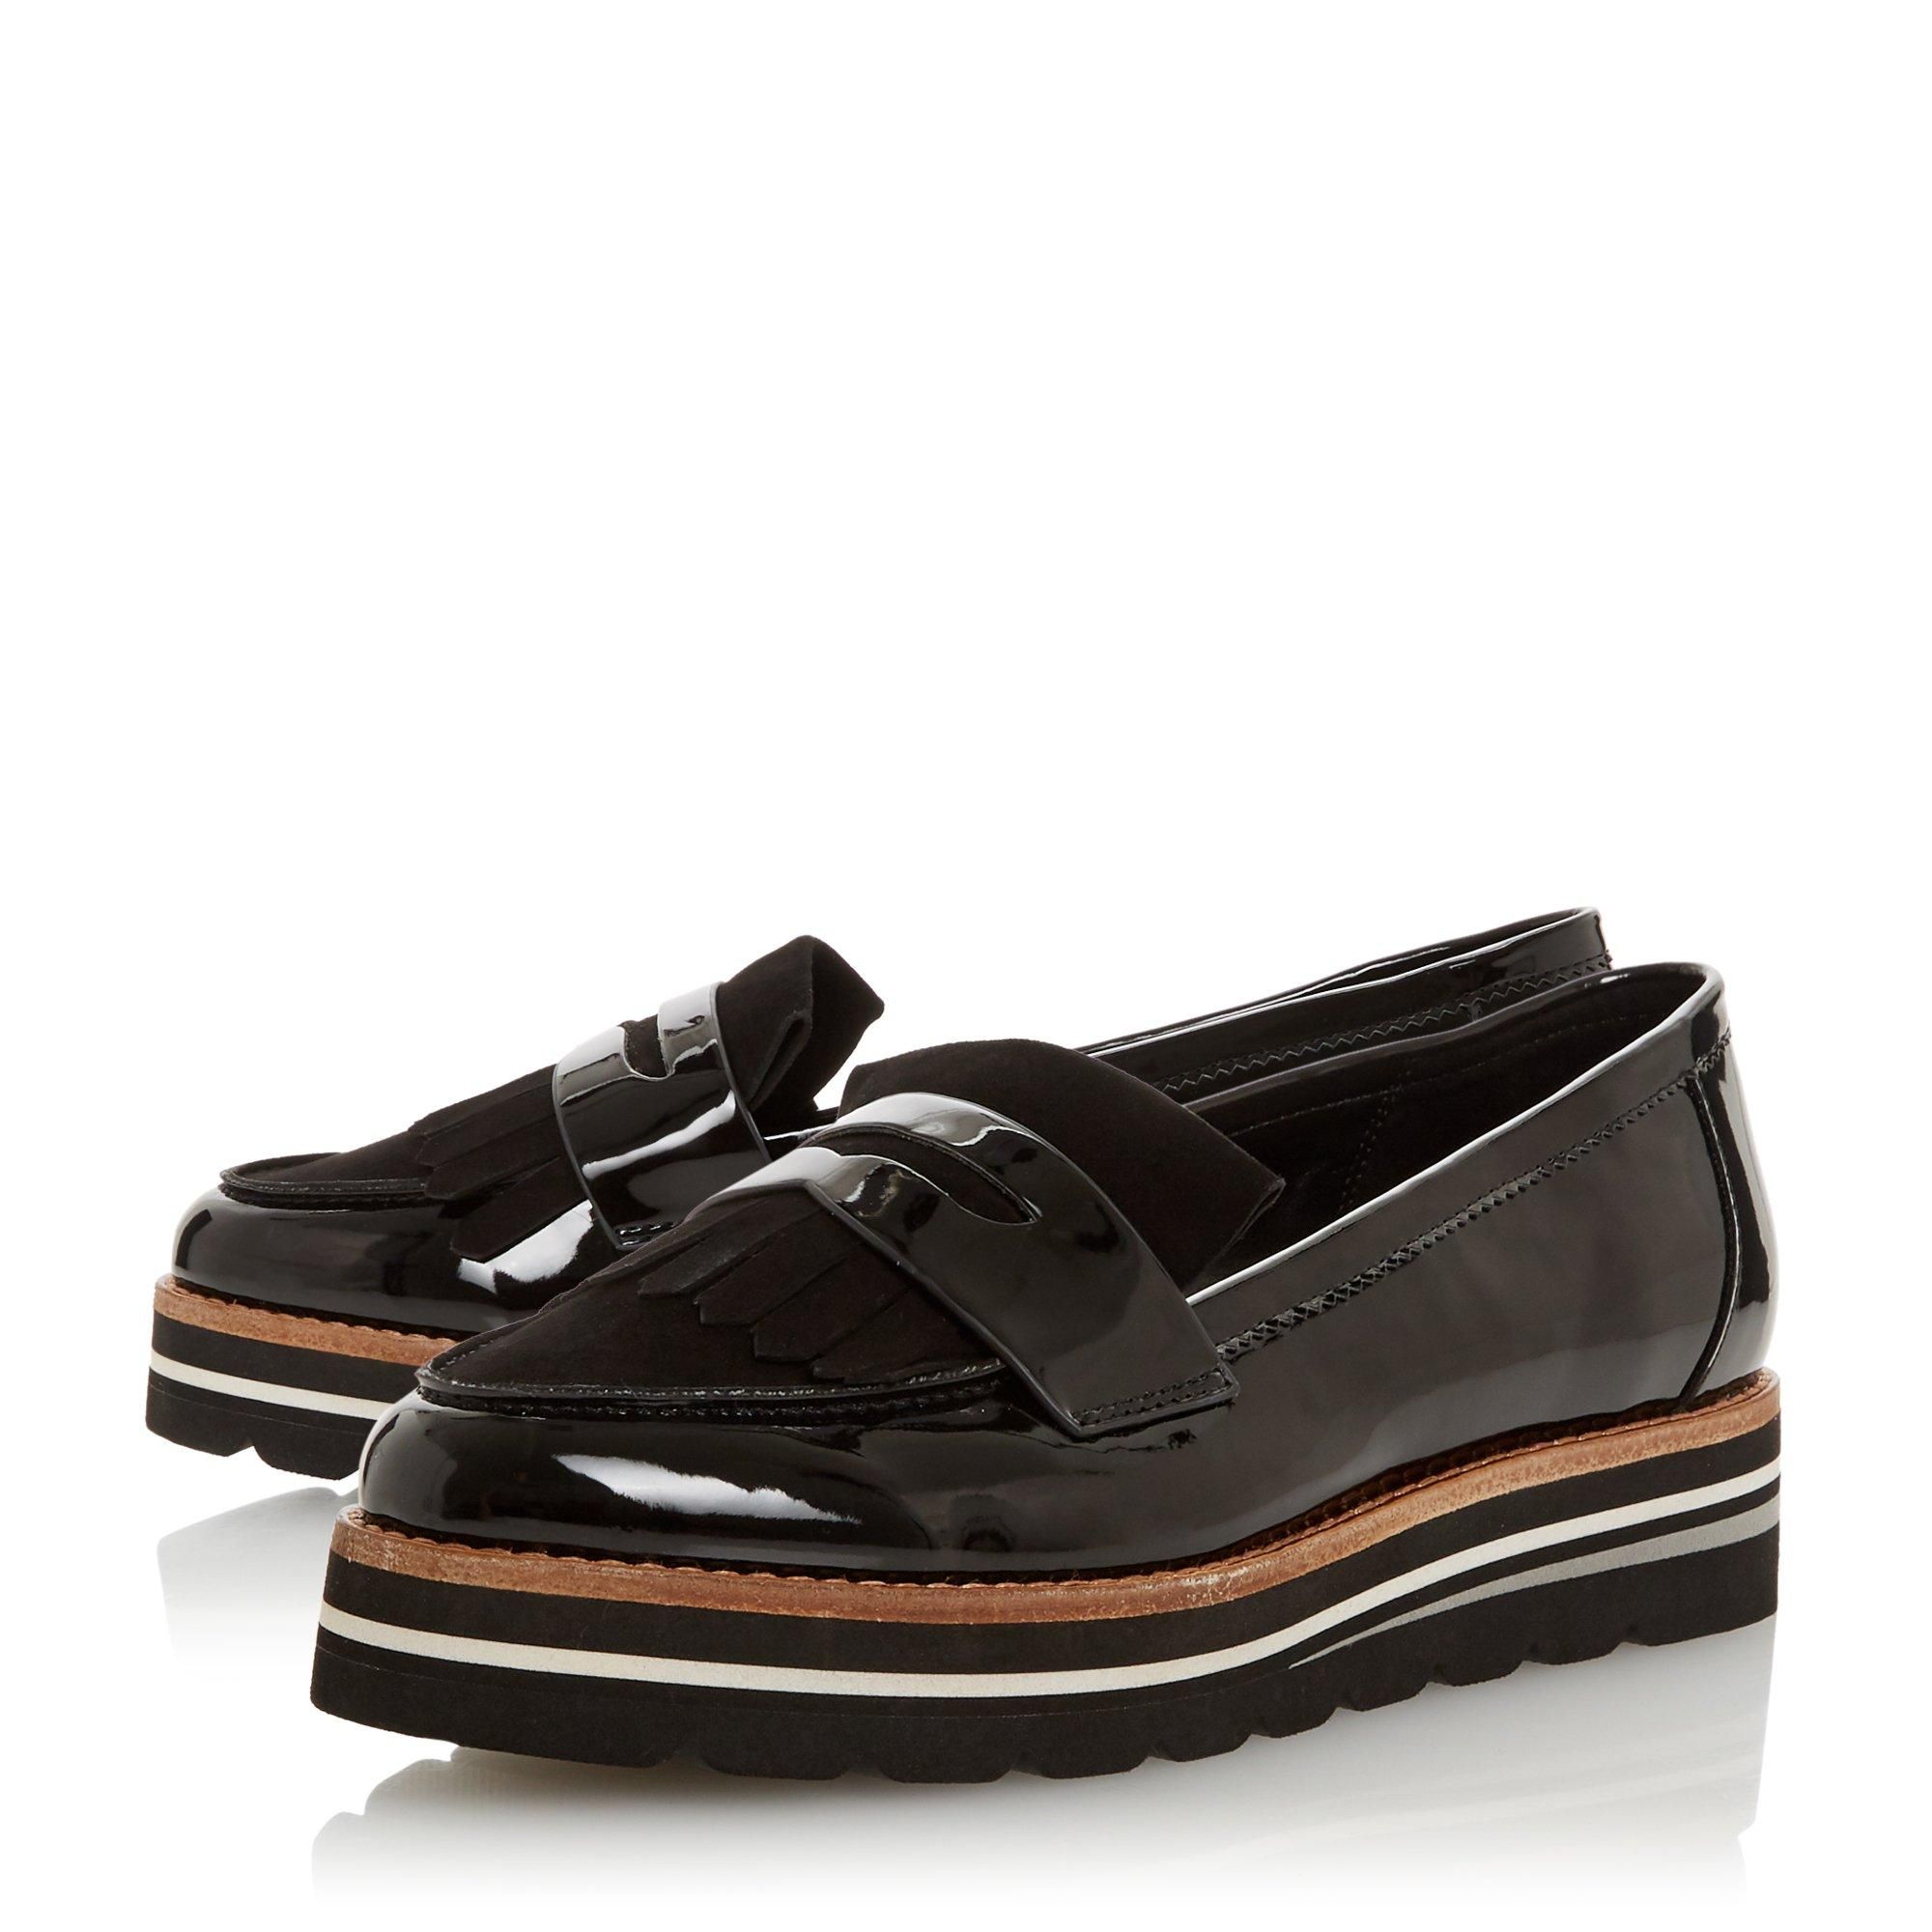 Create chic daytime looks with the Gracella loafer from Dune London. Resting on a flatform heel, it features smart apron detailing. It is complete with a fringed trim and a timeless saddle strap.